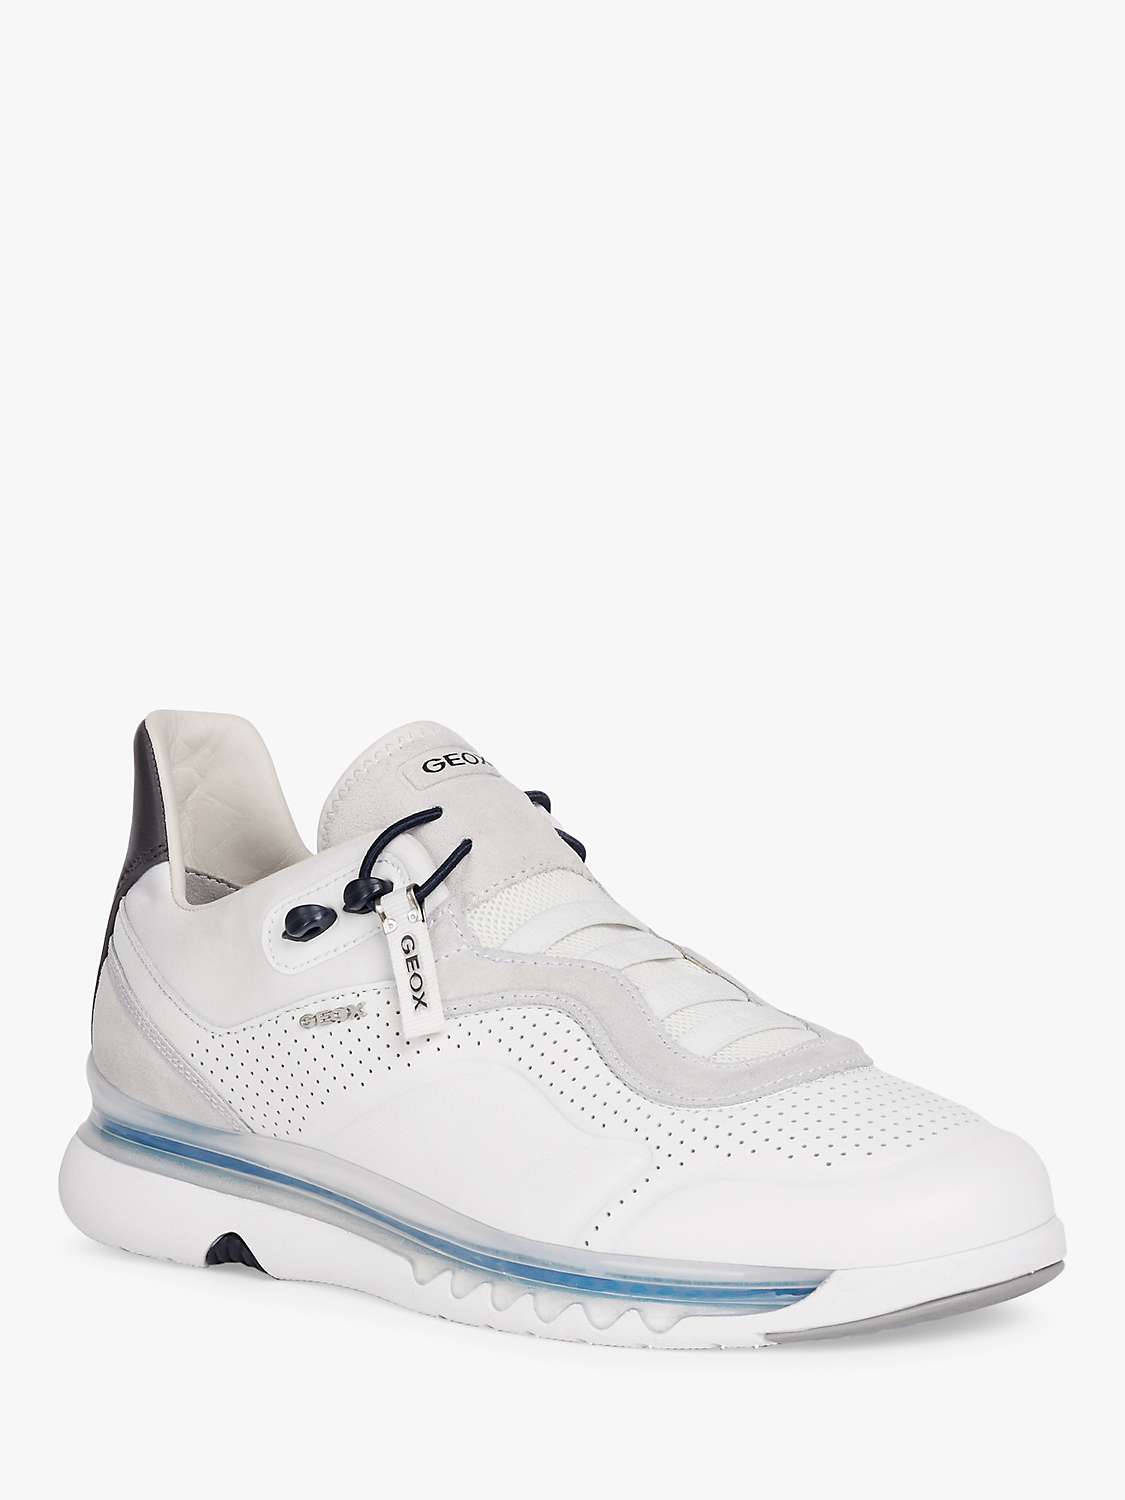 Geox Levita Wide Fit Leather Trainers, White at John Lewis & Partners